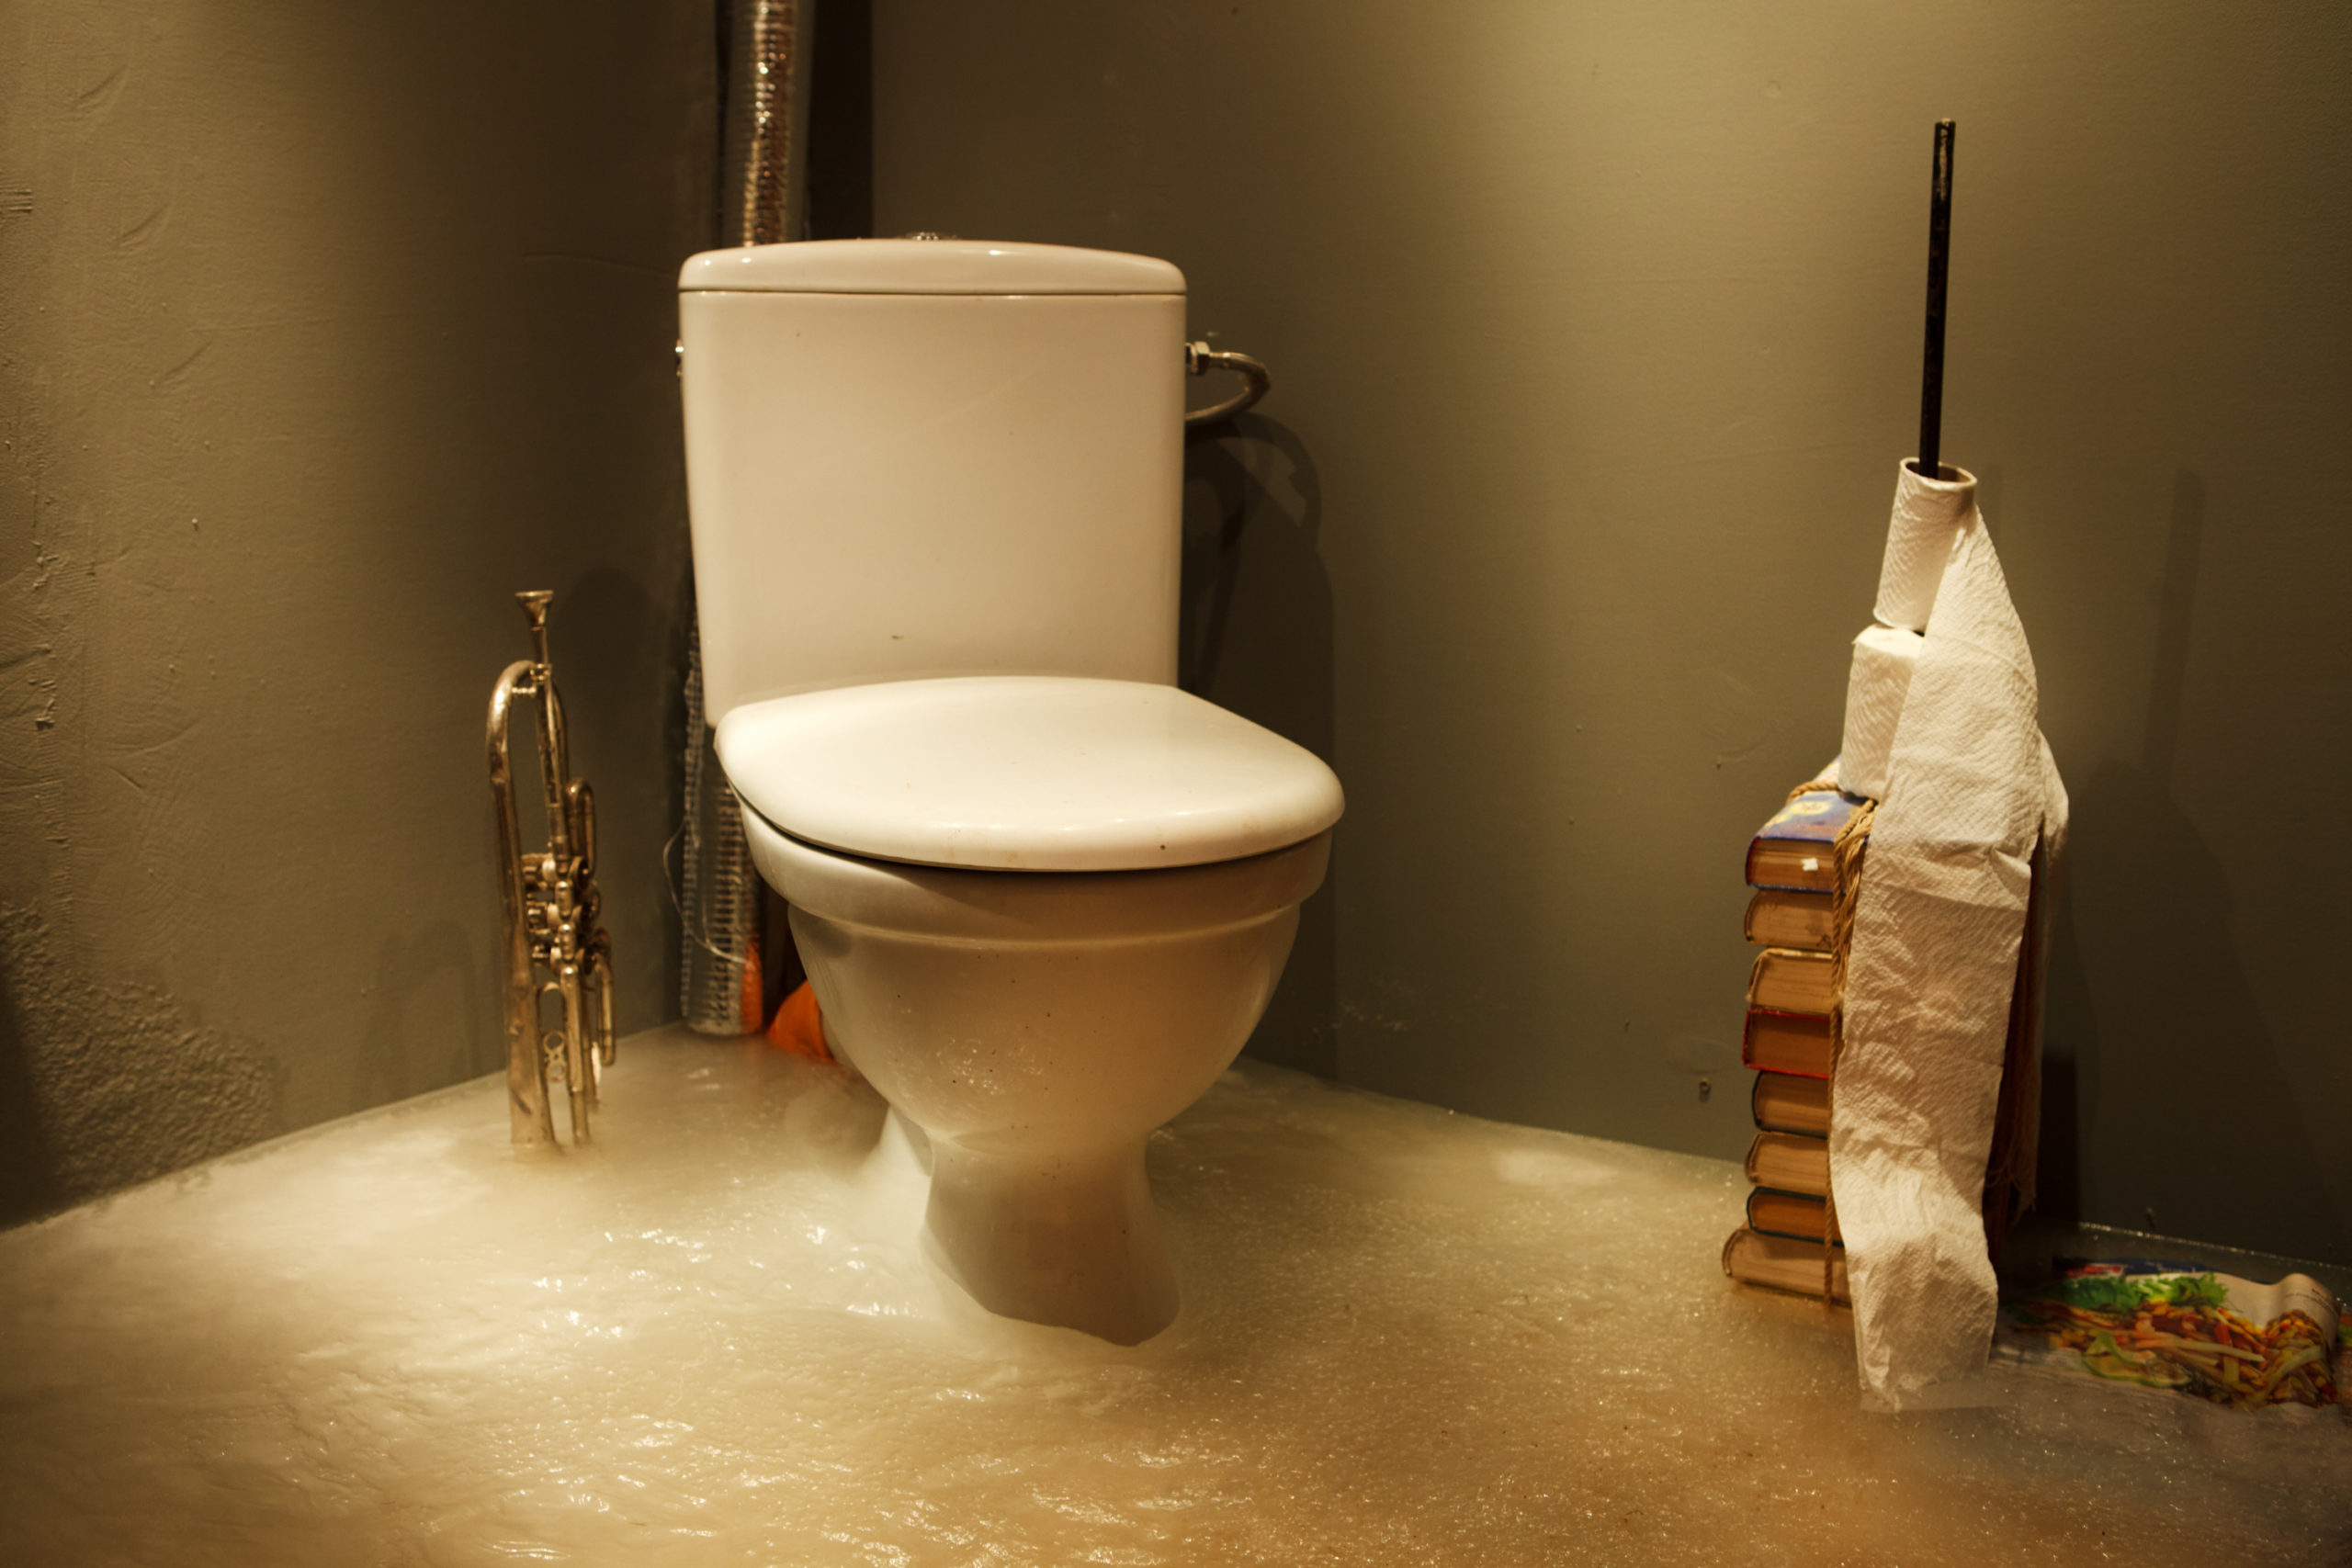 DIY Clogged Toilets: 3 Things to Try Out Before Calling the Experts